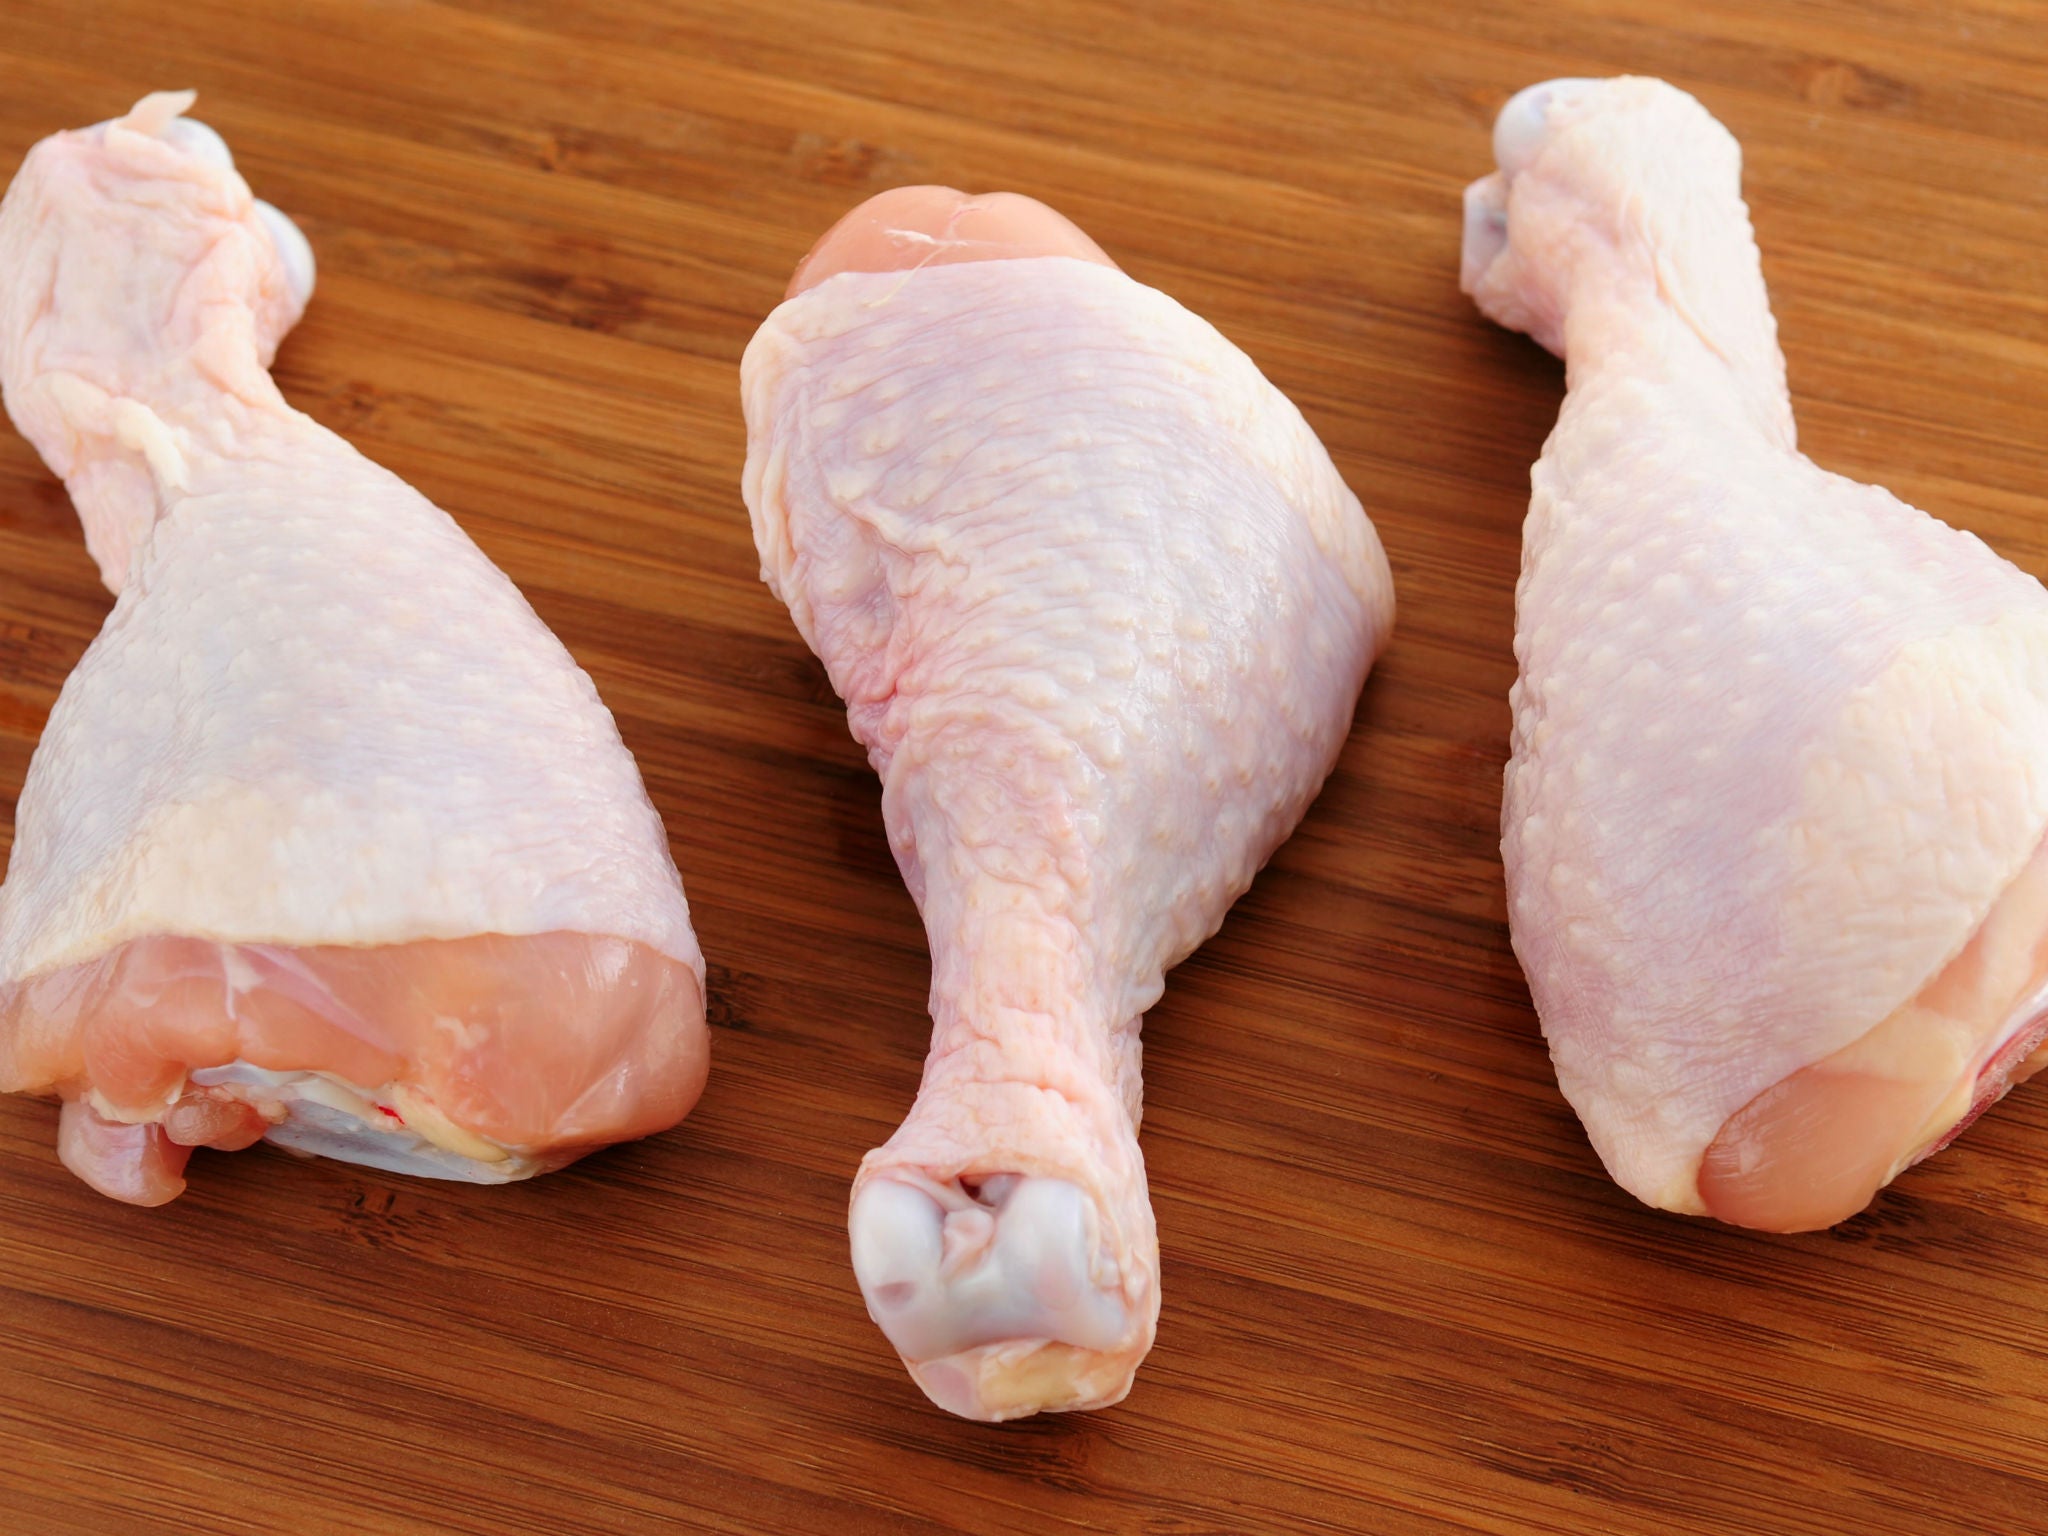 Two thirds of fresh chicken sold in UK supermarkets is infected with the E Coli superbug, a study has found